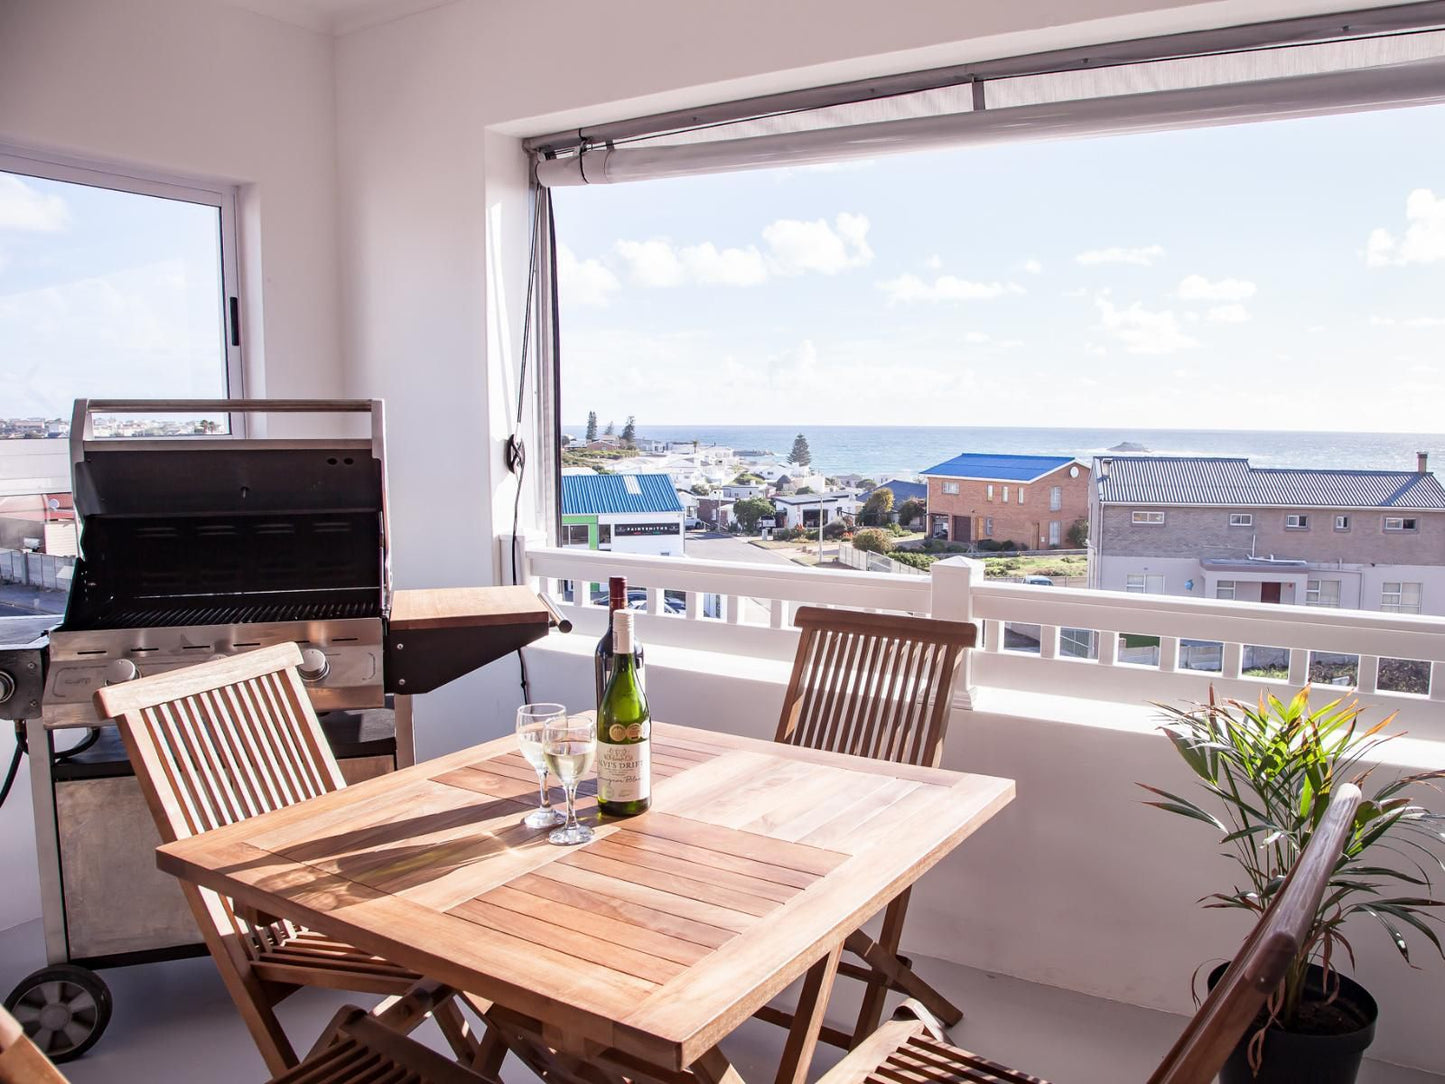 Simply Yzer Self Catering Apartments Yzerfontein Western Cape South Africa 